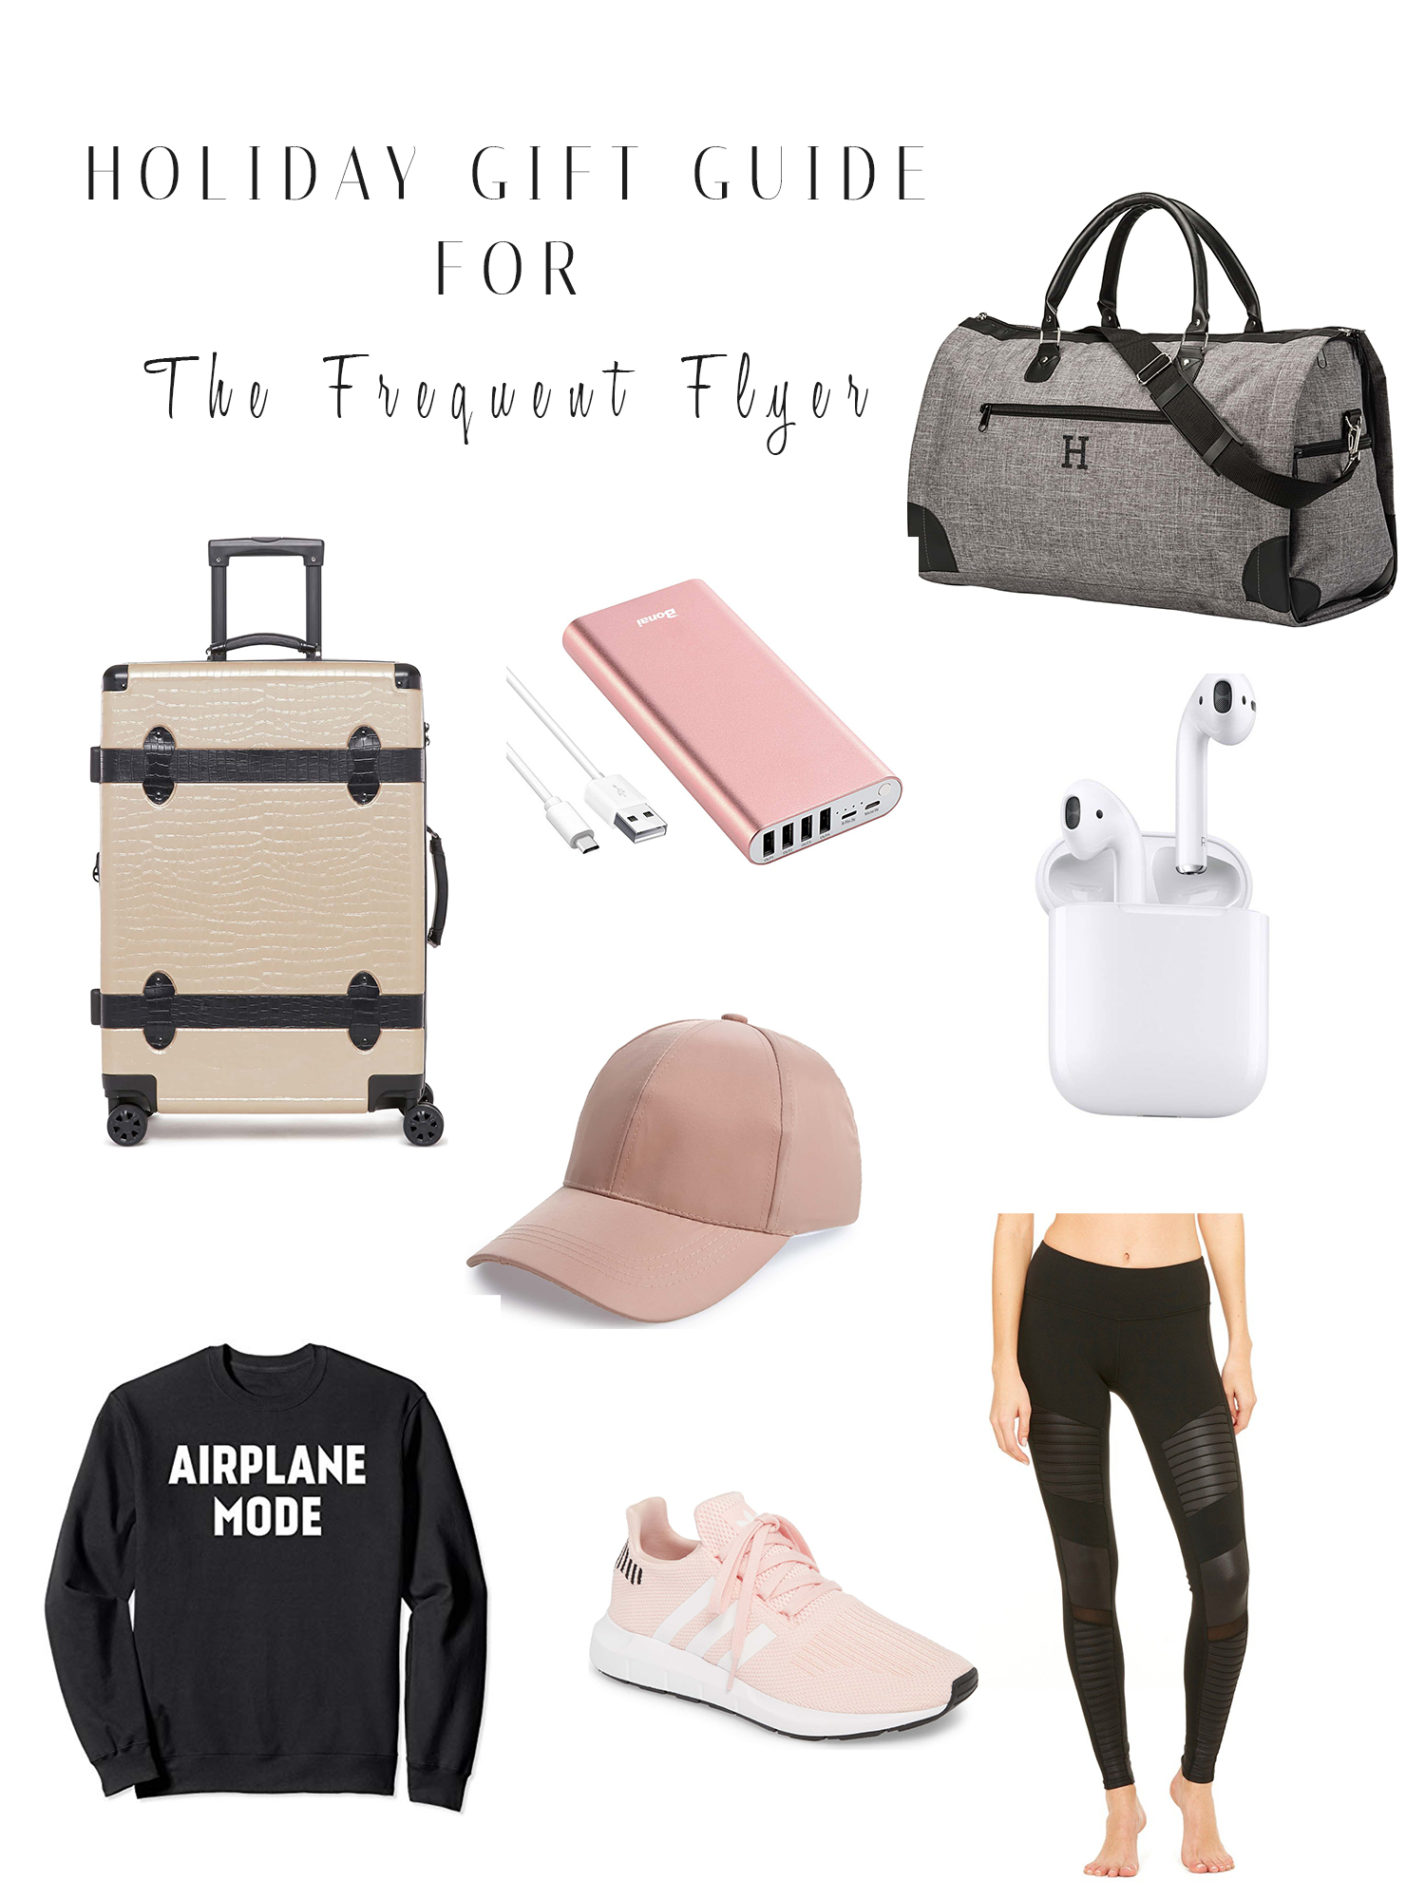 Holiday Gift Guide | Gift Guide for The Frequent Flyer, The Girly Girl, The Beauty Buff, Your Guy, The Hostess, The Coffee Addict | Christmas Gifts | Blondie in the City by Hayley Larue